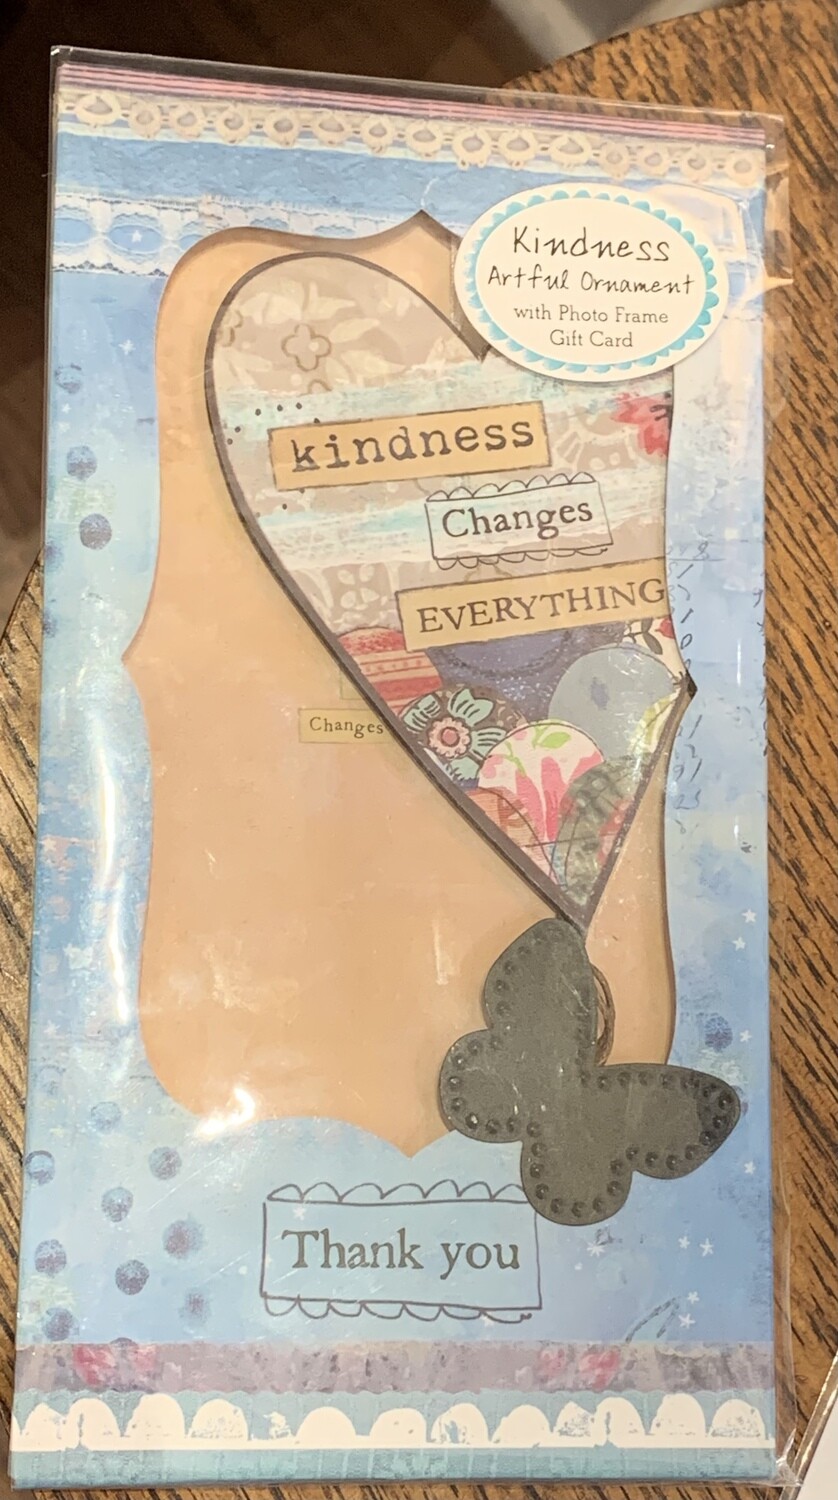 Kindness Artfull Ornament with Photo Frame